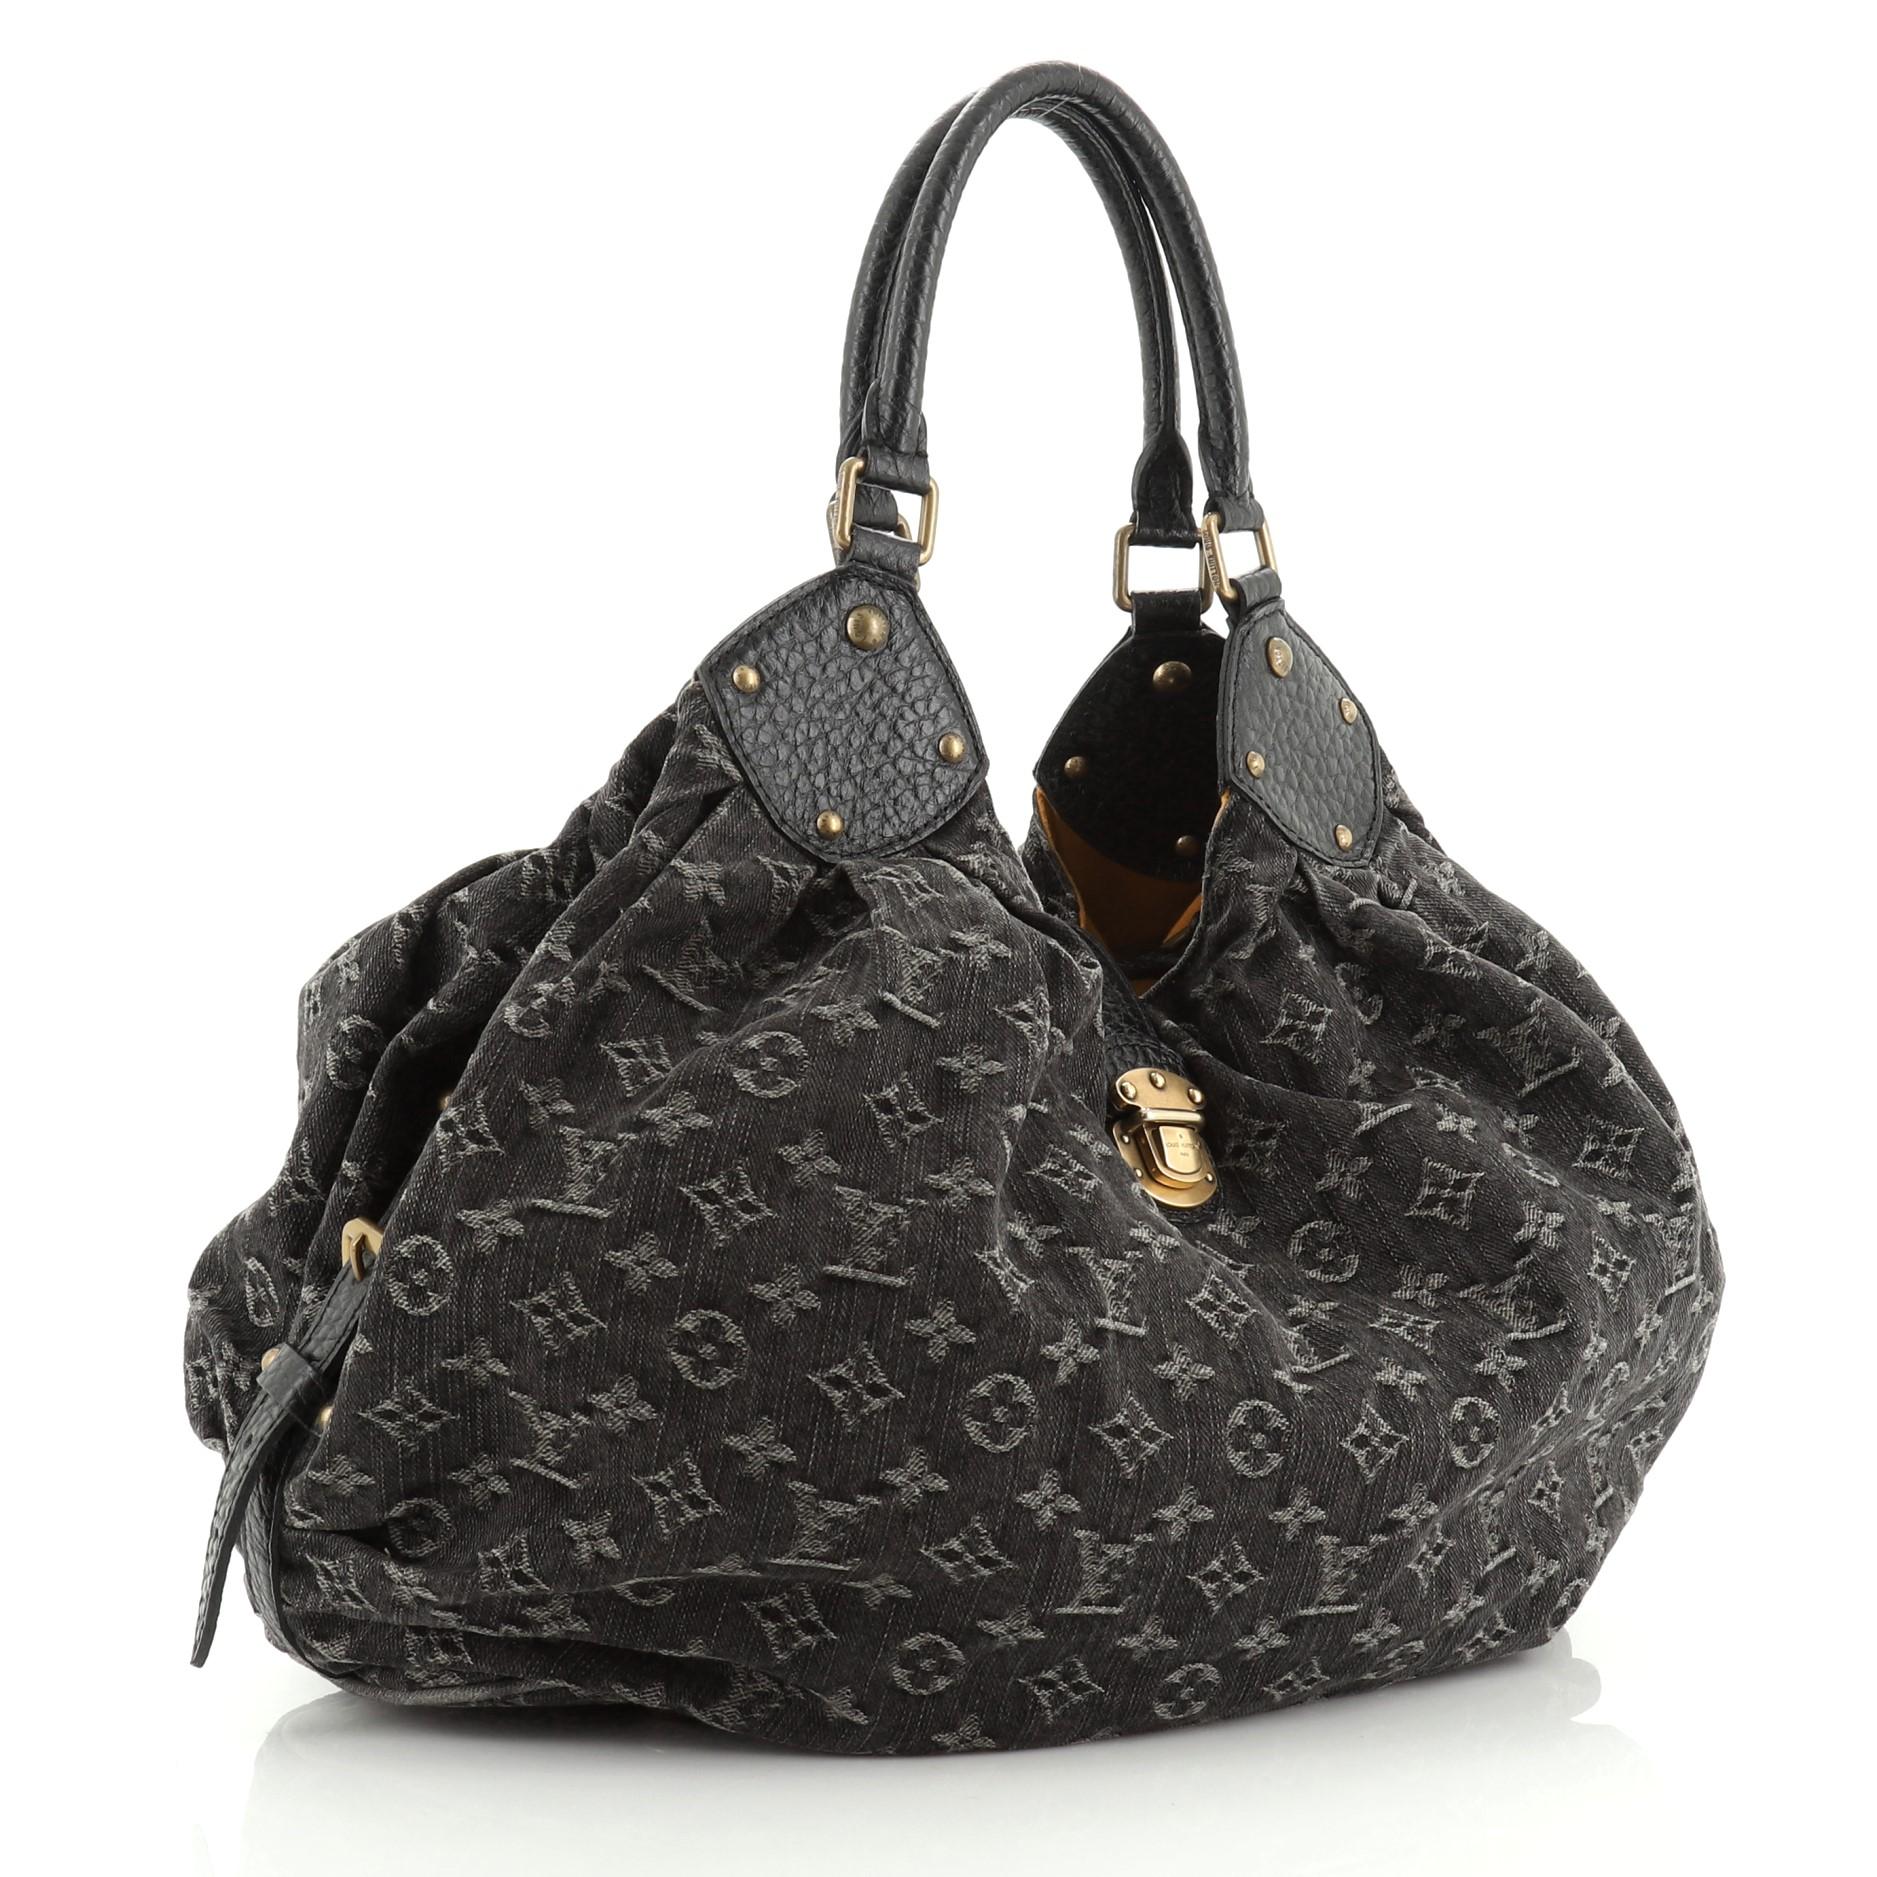 This Louis Vuitton XL Hobo Denim is an everyday bag that unites timeless design with heritage details. Crafted from black monogram denim, features dual rolled handles, buckle and stud details, side belt strap, protective base studs, and aged